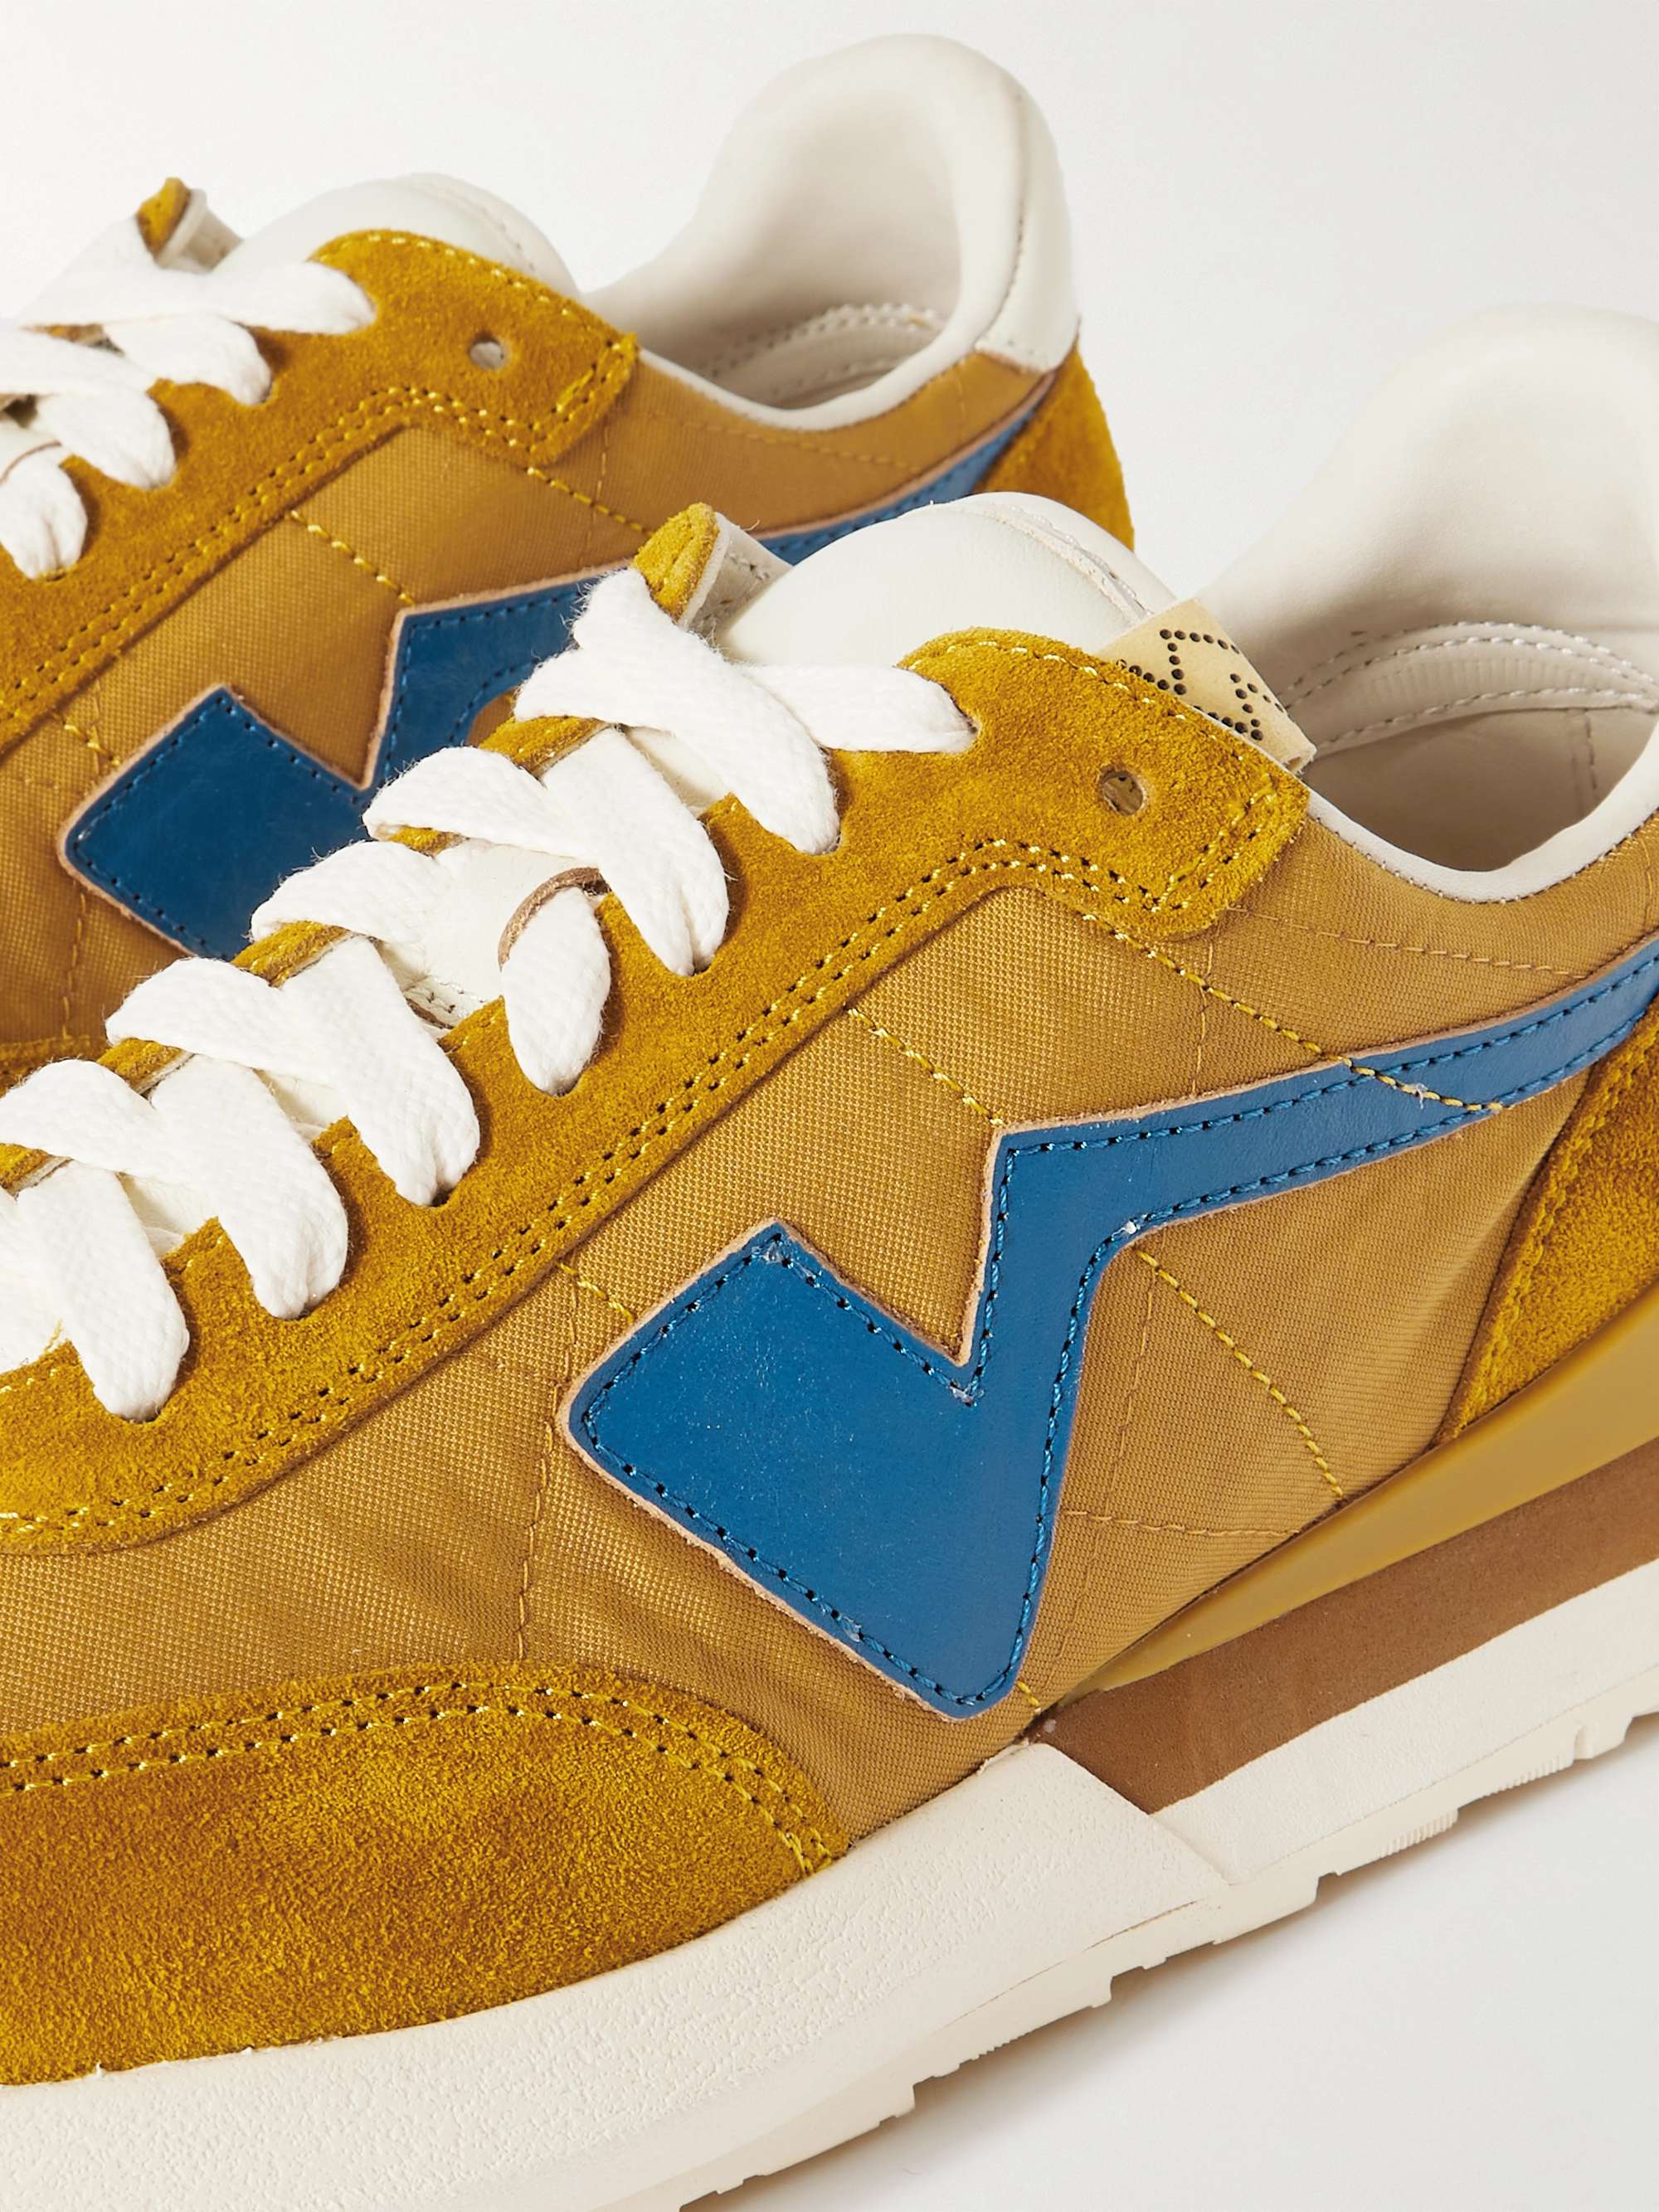 VISVIM FKT Runner Suede and Leather-Trimmed Nylon-Blend Sneakers